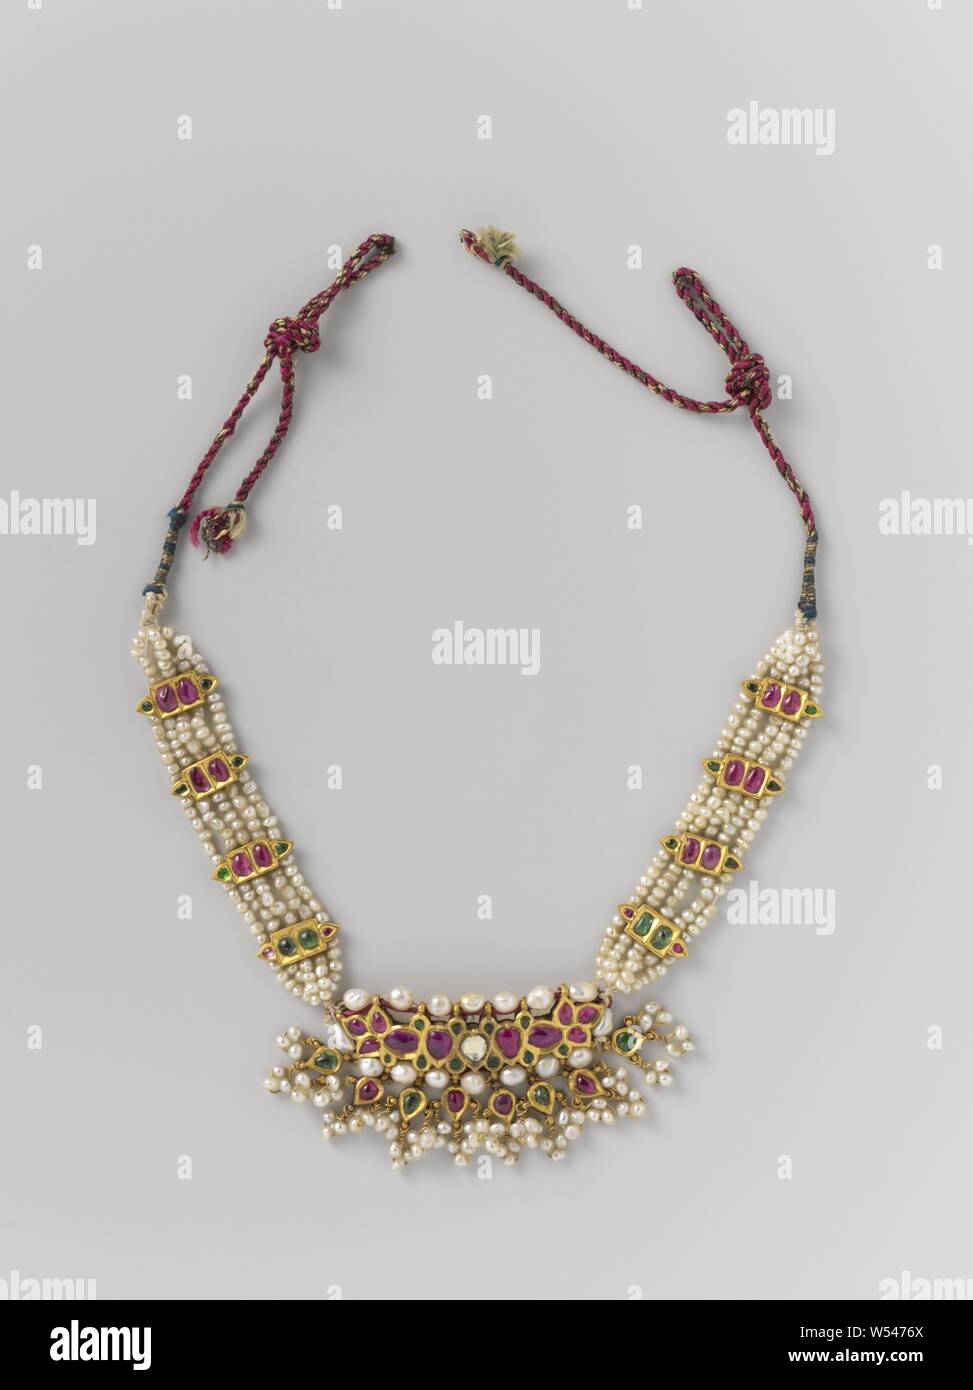 Necklace (kalyanti), Necklace (kalyanti) consisting of a golden center piece with red and green stones inlaid and with diamond splinters and pearls set. 8 leaf-shaped pendants hang from it, each with 3 clusters of 3 pearls. The center piece is supported by five strings of pearls that are held together in four places by golden brackets on each side., anonymous, Surat, c. 1750, gold (metal), diamond (mineral), pearl, w 31 cm × h 0.5 cm × d 4 cm Stock Photo